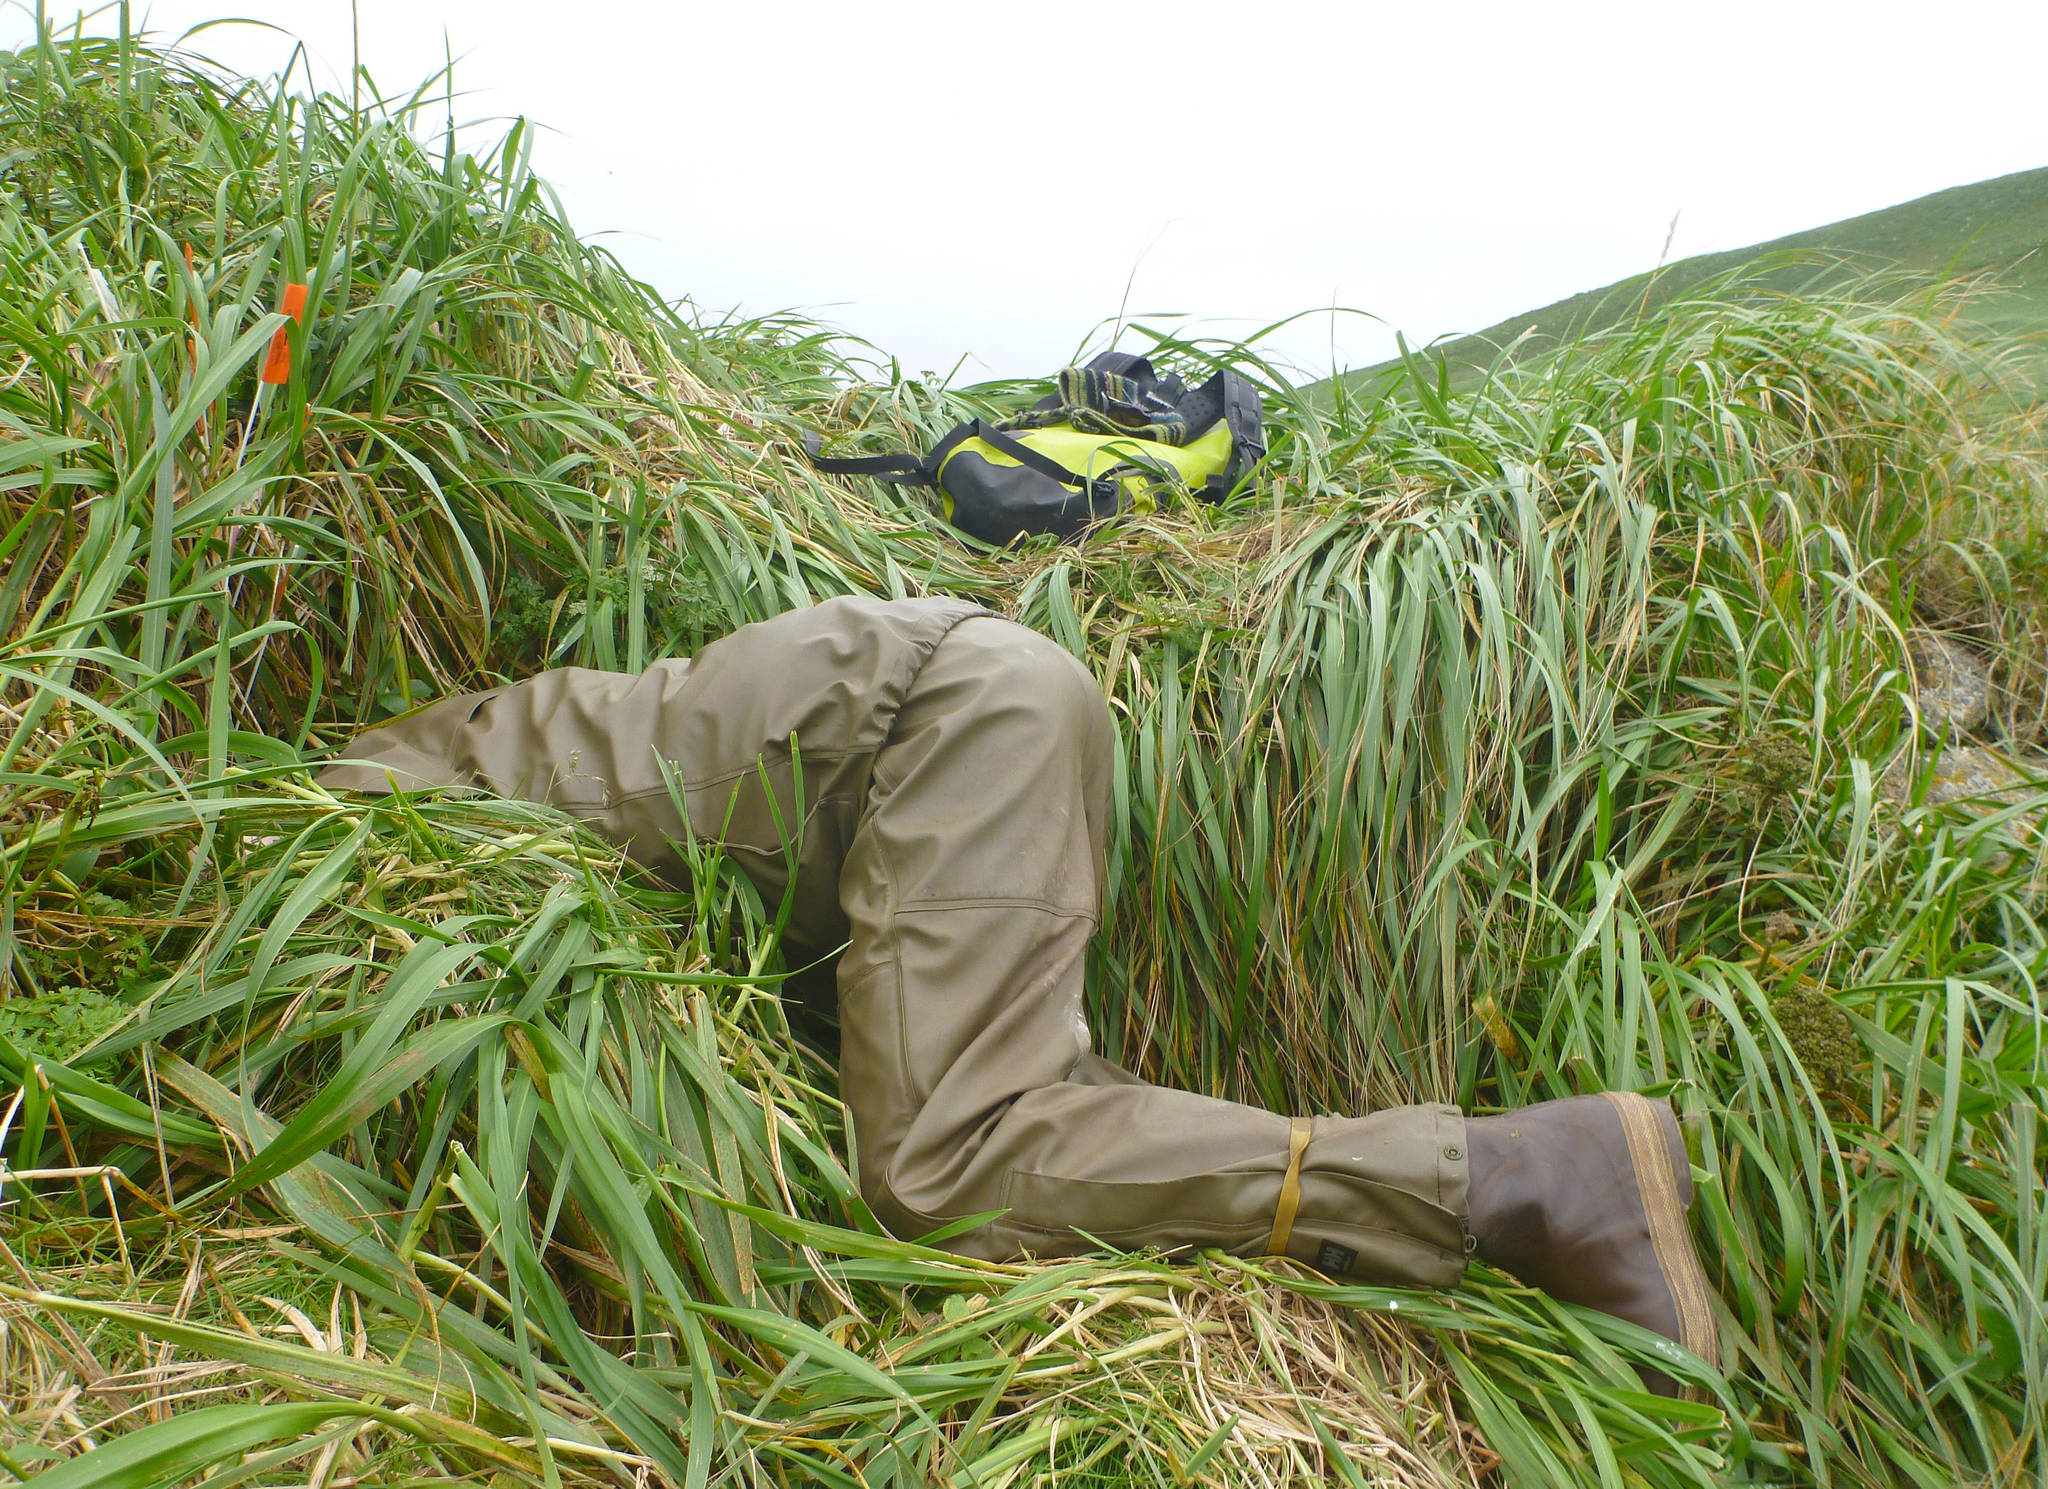 Biologist Daneil Rapp reaches way into a burrow to investigate its contents. (Photo by Sarah Youngren/USFWS)